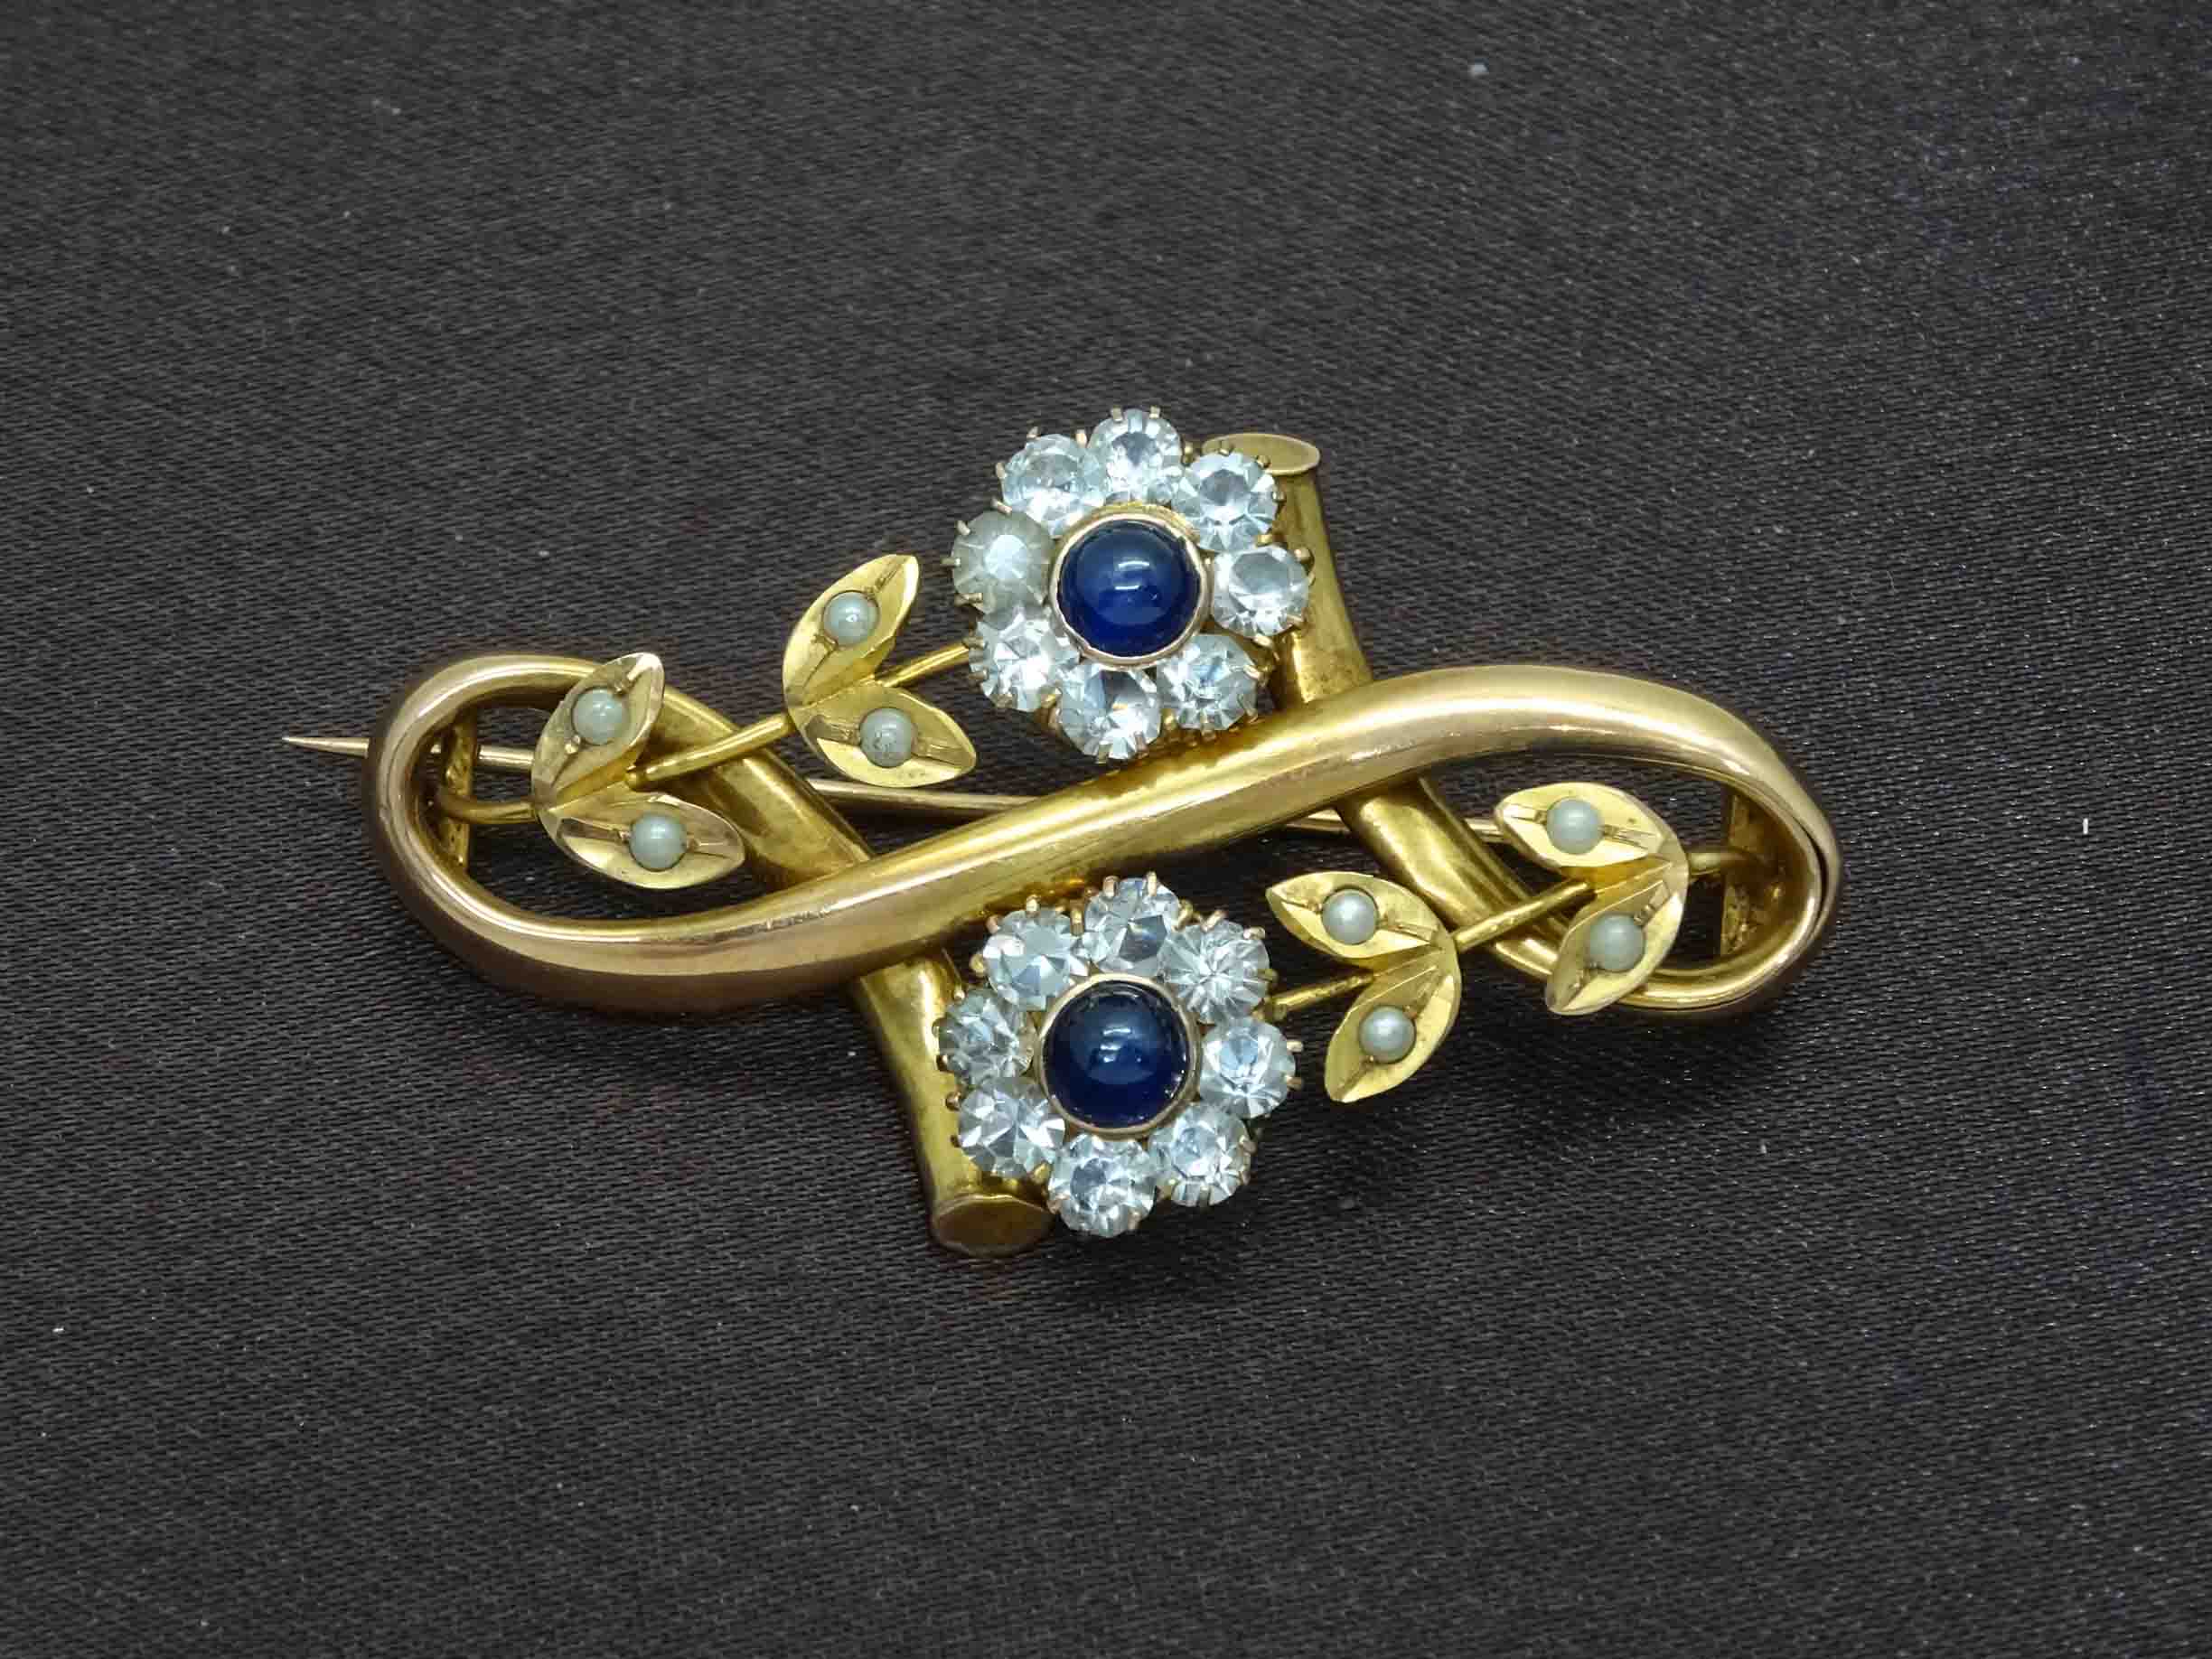 Antique EROV Sapphire & Seed Pearl & Crystal Floral Brooch Pin 14k Gold -  Jewelry & Coin Mart, Schaumburg, IL